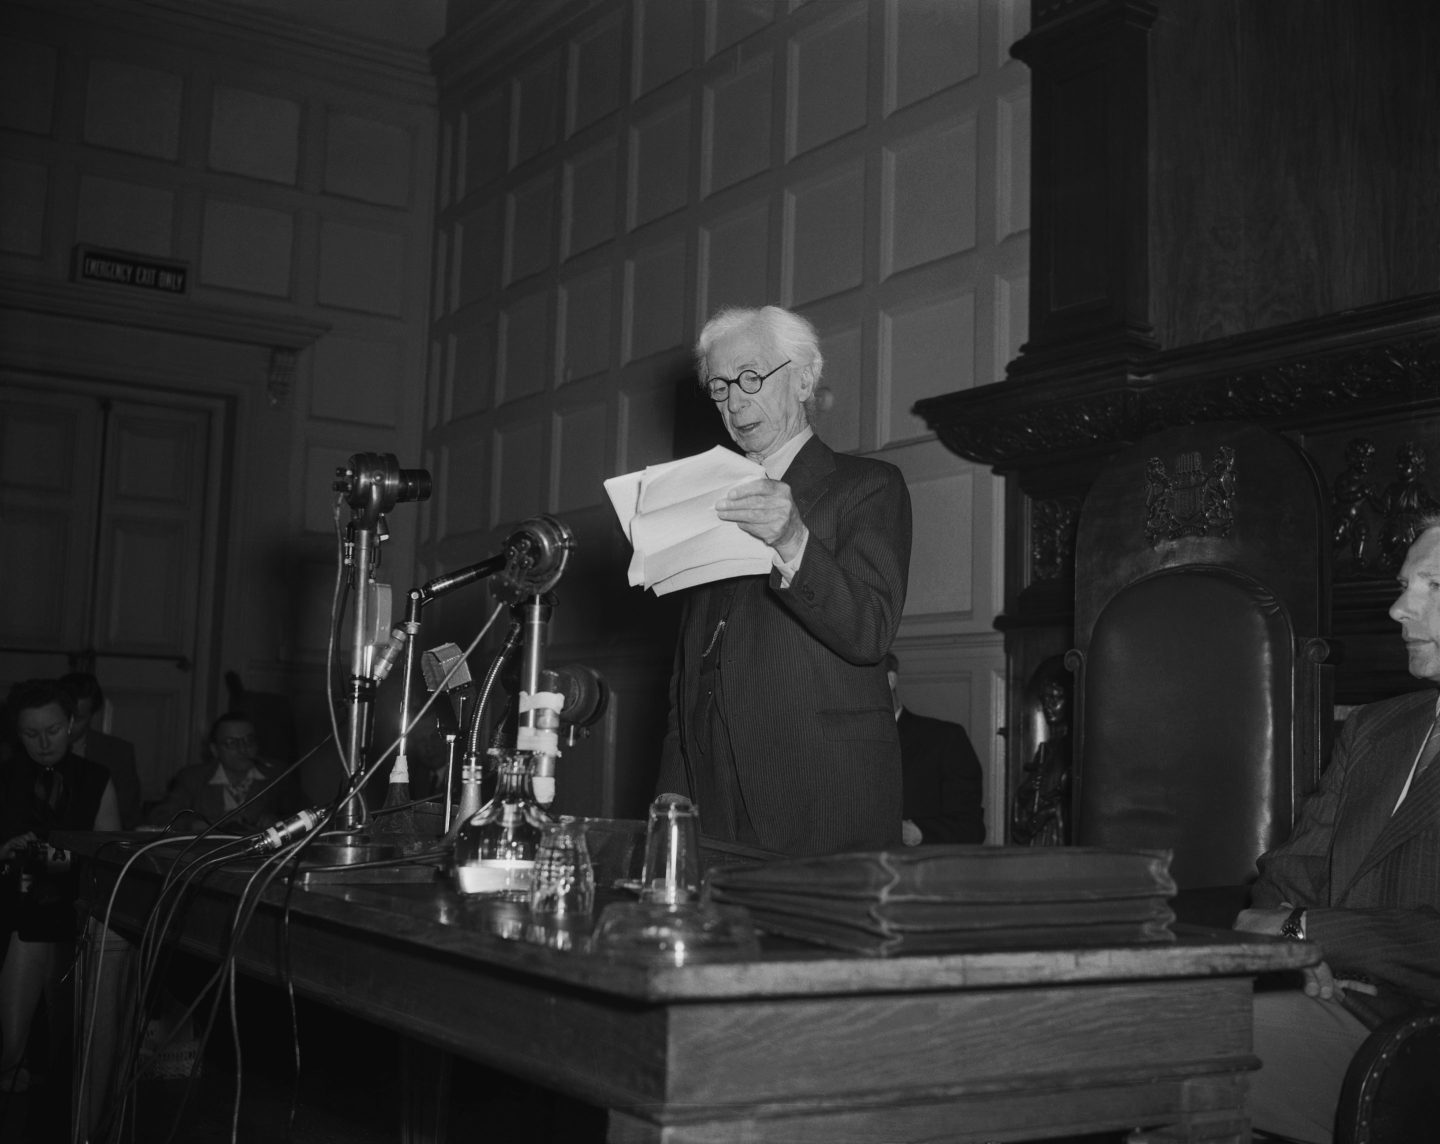 British mathematician and philosopher Bertrand Russell reads a statement signed by himself and eight other eminent scientists and calling for the renunciation of war because the hydrogen bomb threatens &#8220;the continued existence of mankind.&#8221; Among the signers was the late Albert Einstein. Seven Nobel Prize winners were among the signers, whose statement was in the form of an appeal to heads of countries that have acquired or will eventually acquire nuclear armaments.